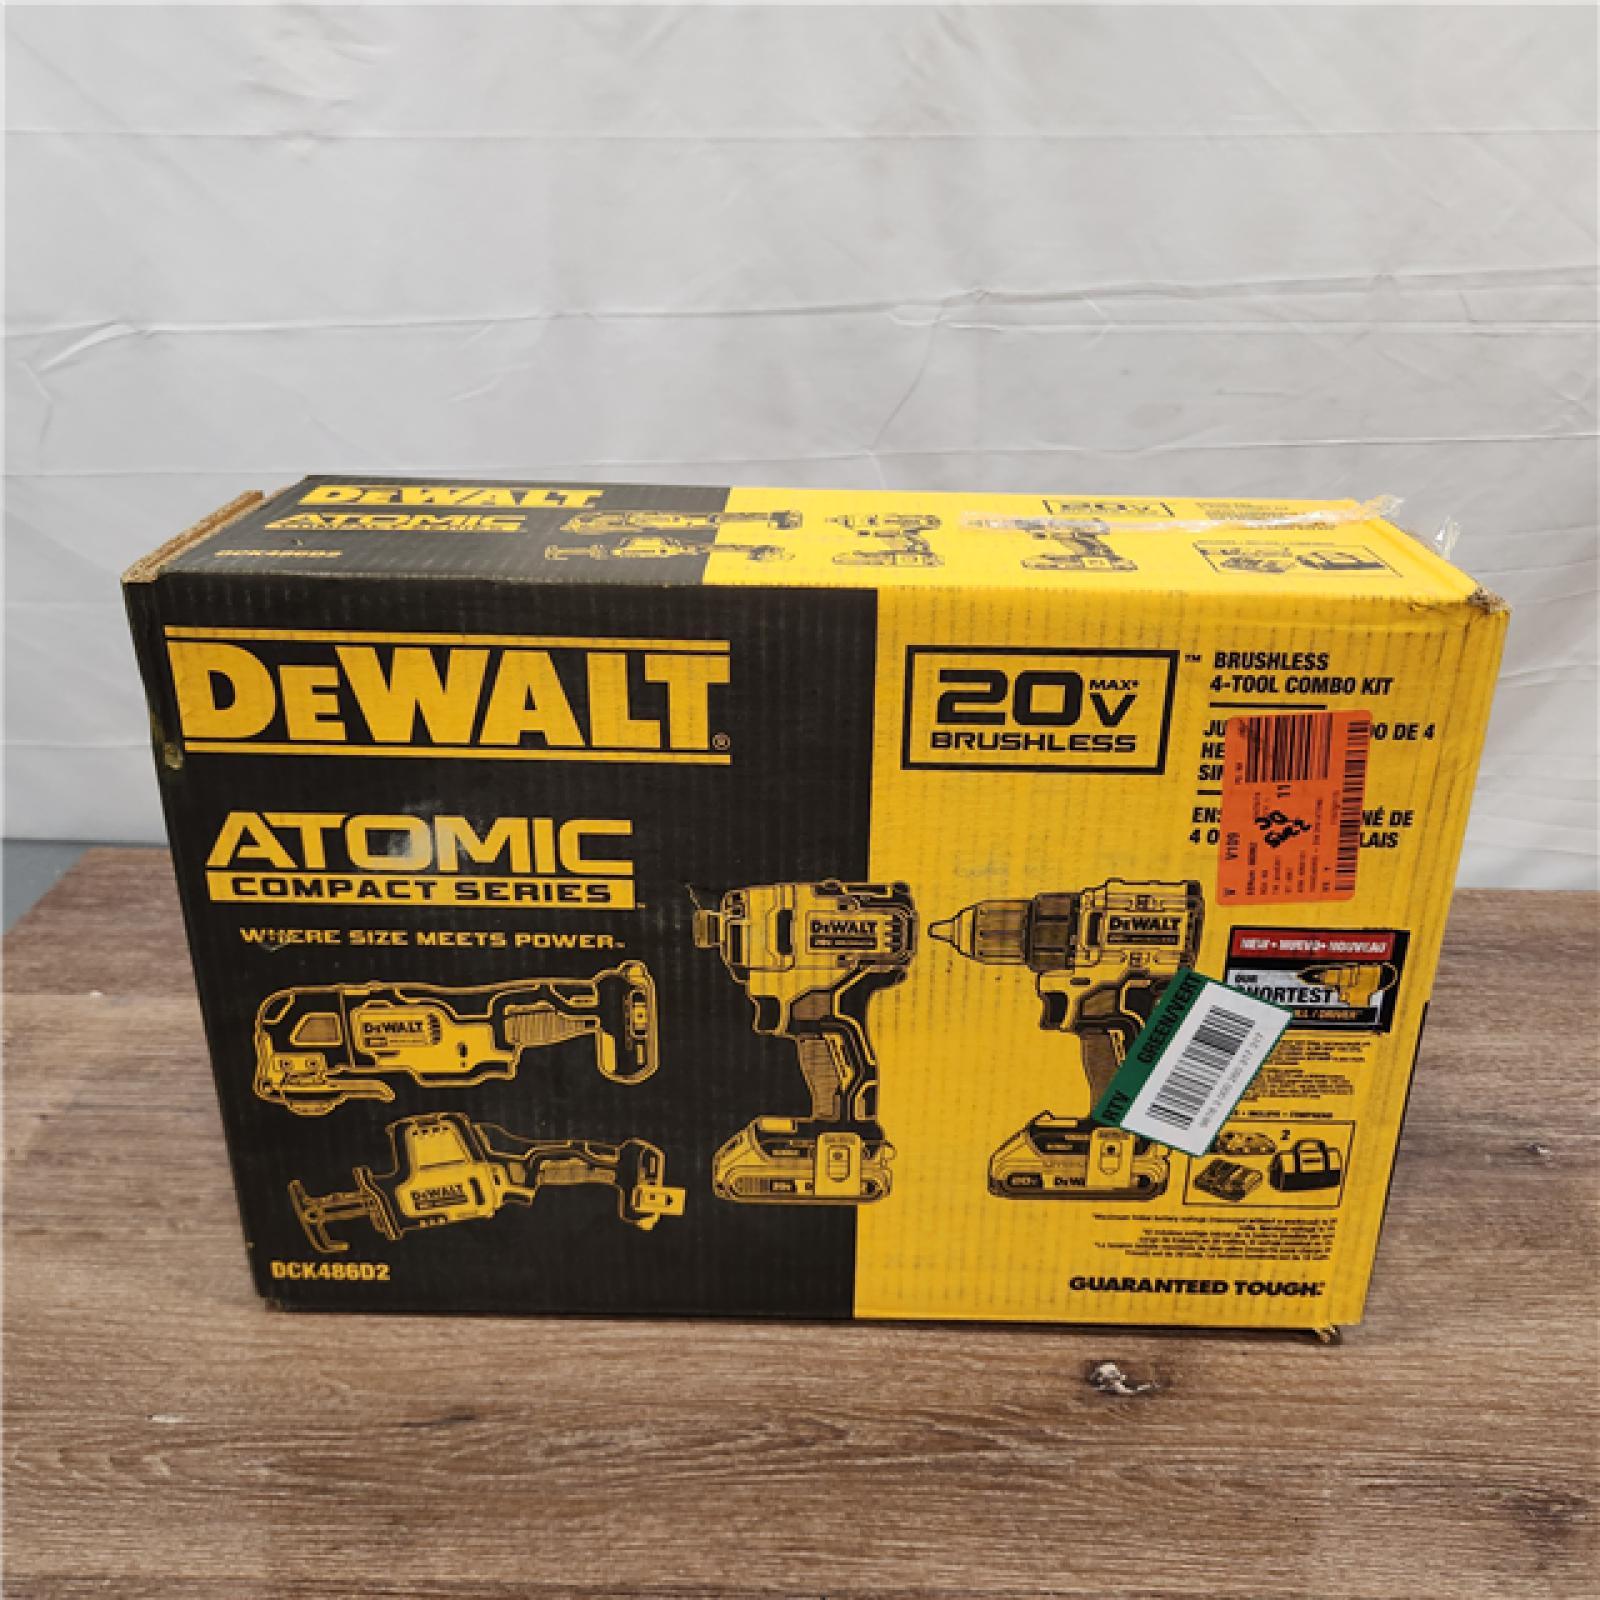 AS-IS DEWALT ATOMIC 20-Volt Lithium-Ion Cordless Brushless Combo Kit (4-Tool) with (2) 2.0Ah Batteries, Charger and Bag